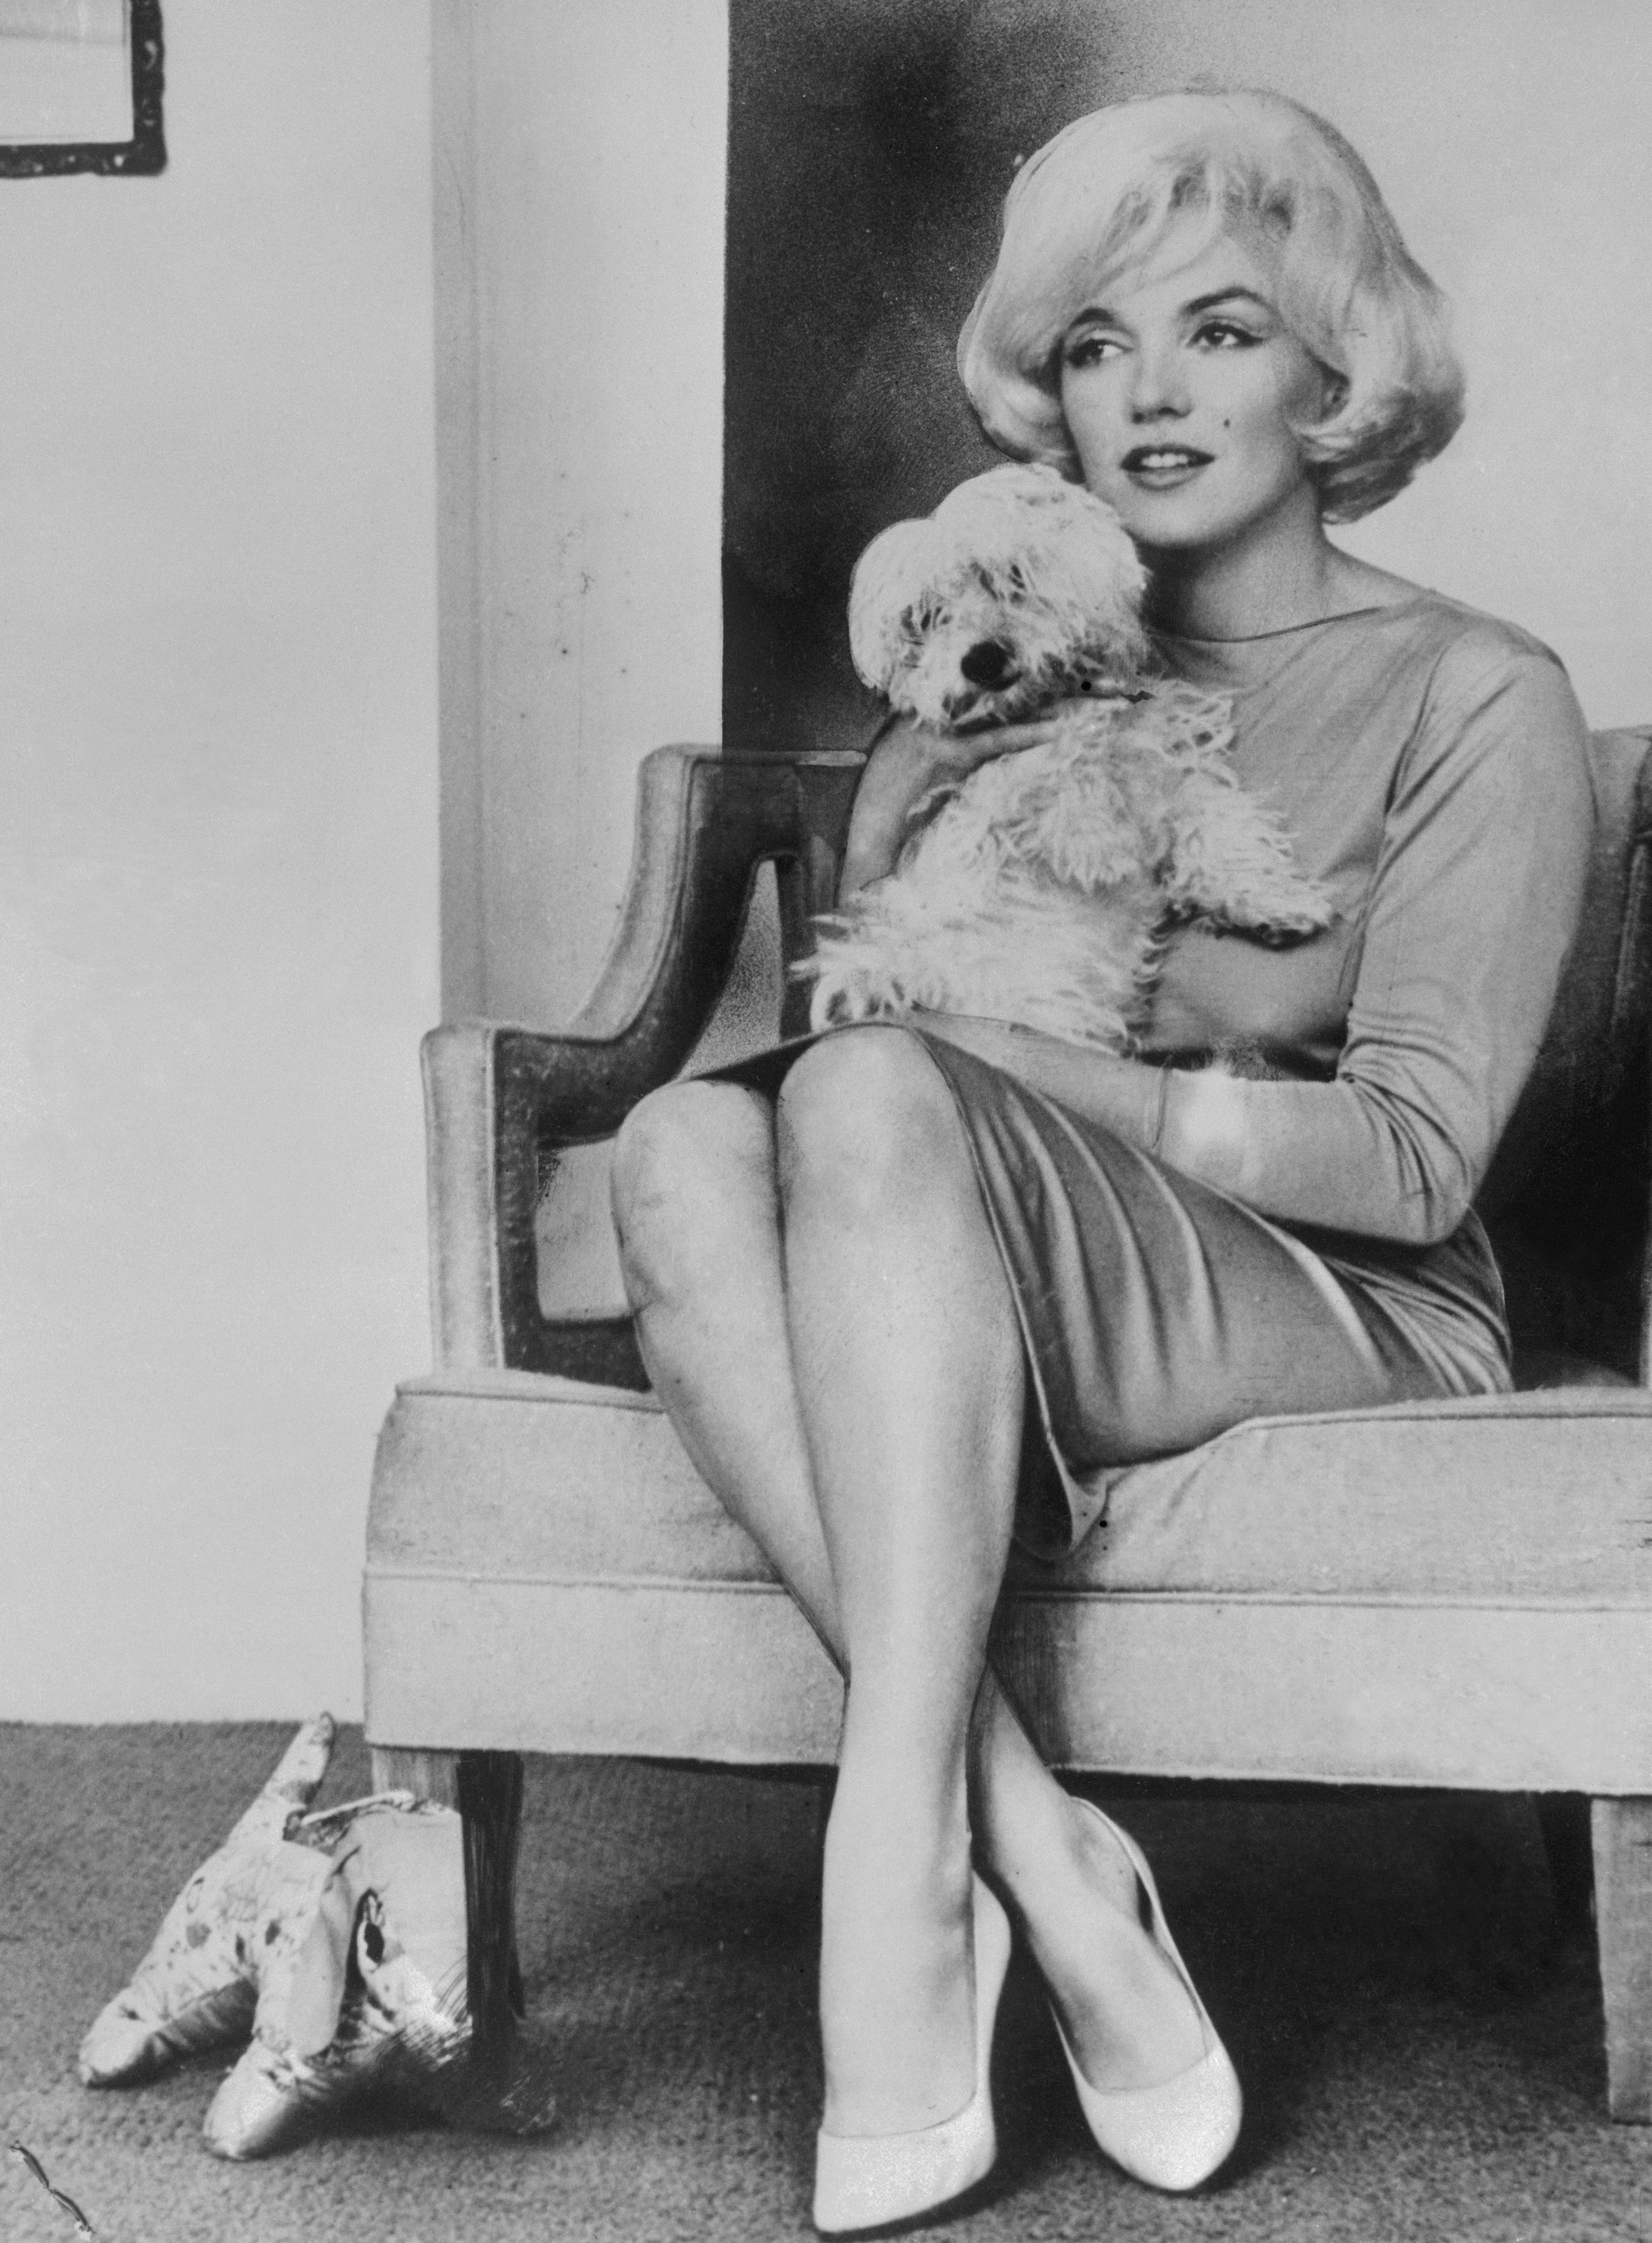 Marilyn Monroe posing with her dog | Source: Getty Images